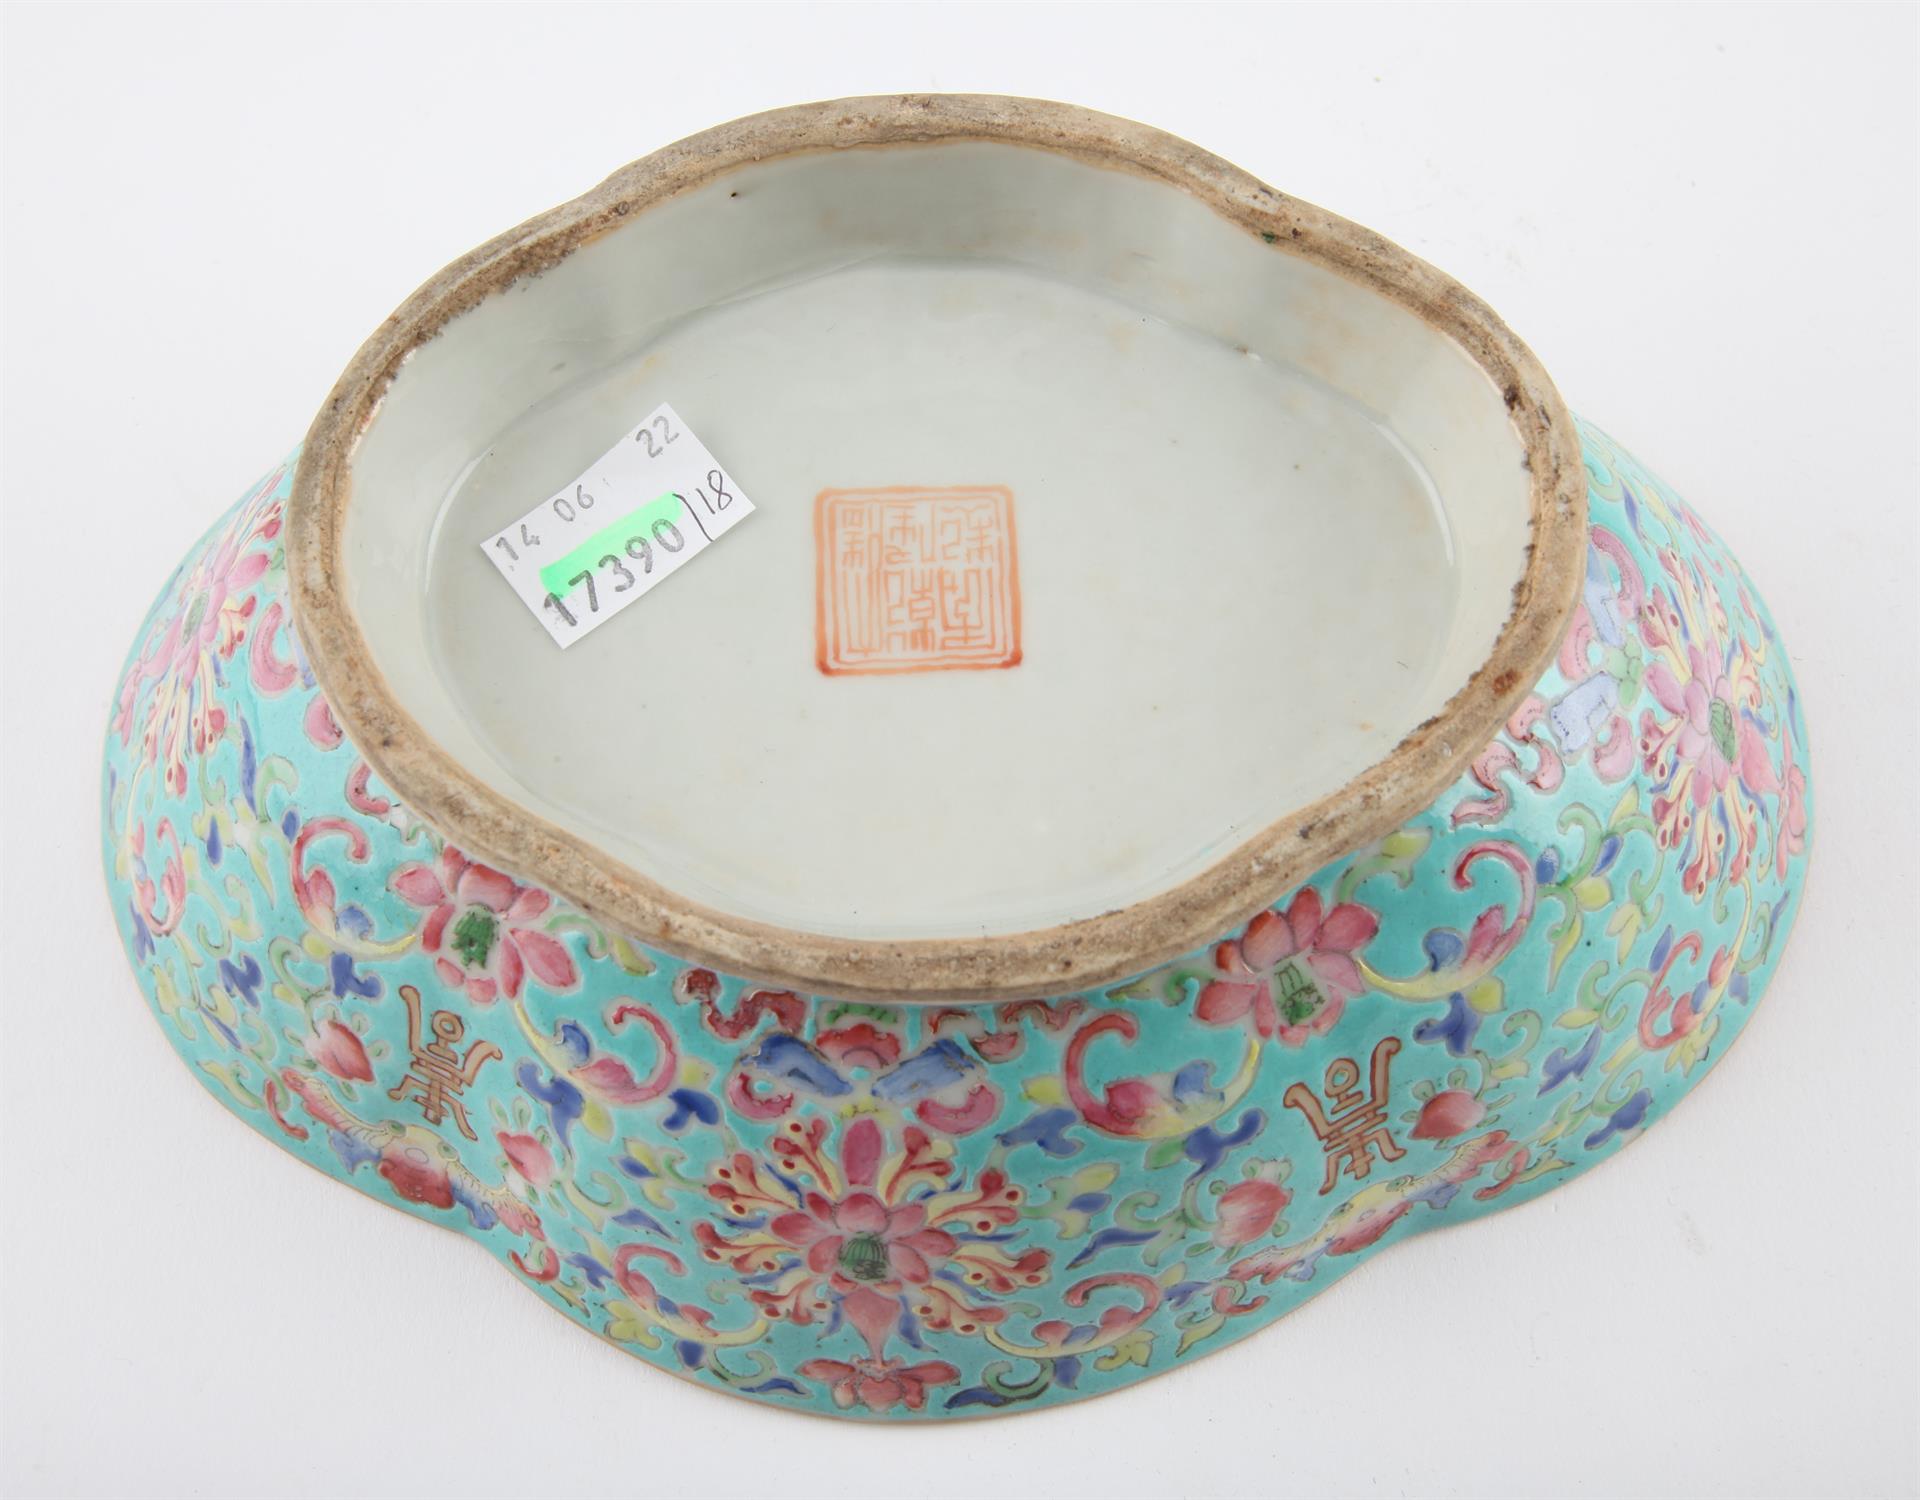 A Chinese Lobed Pedestal Bowl, Qing dynasty Painted with flowers , bats and the Shou longevity - Image 8 of 8